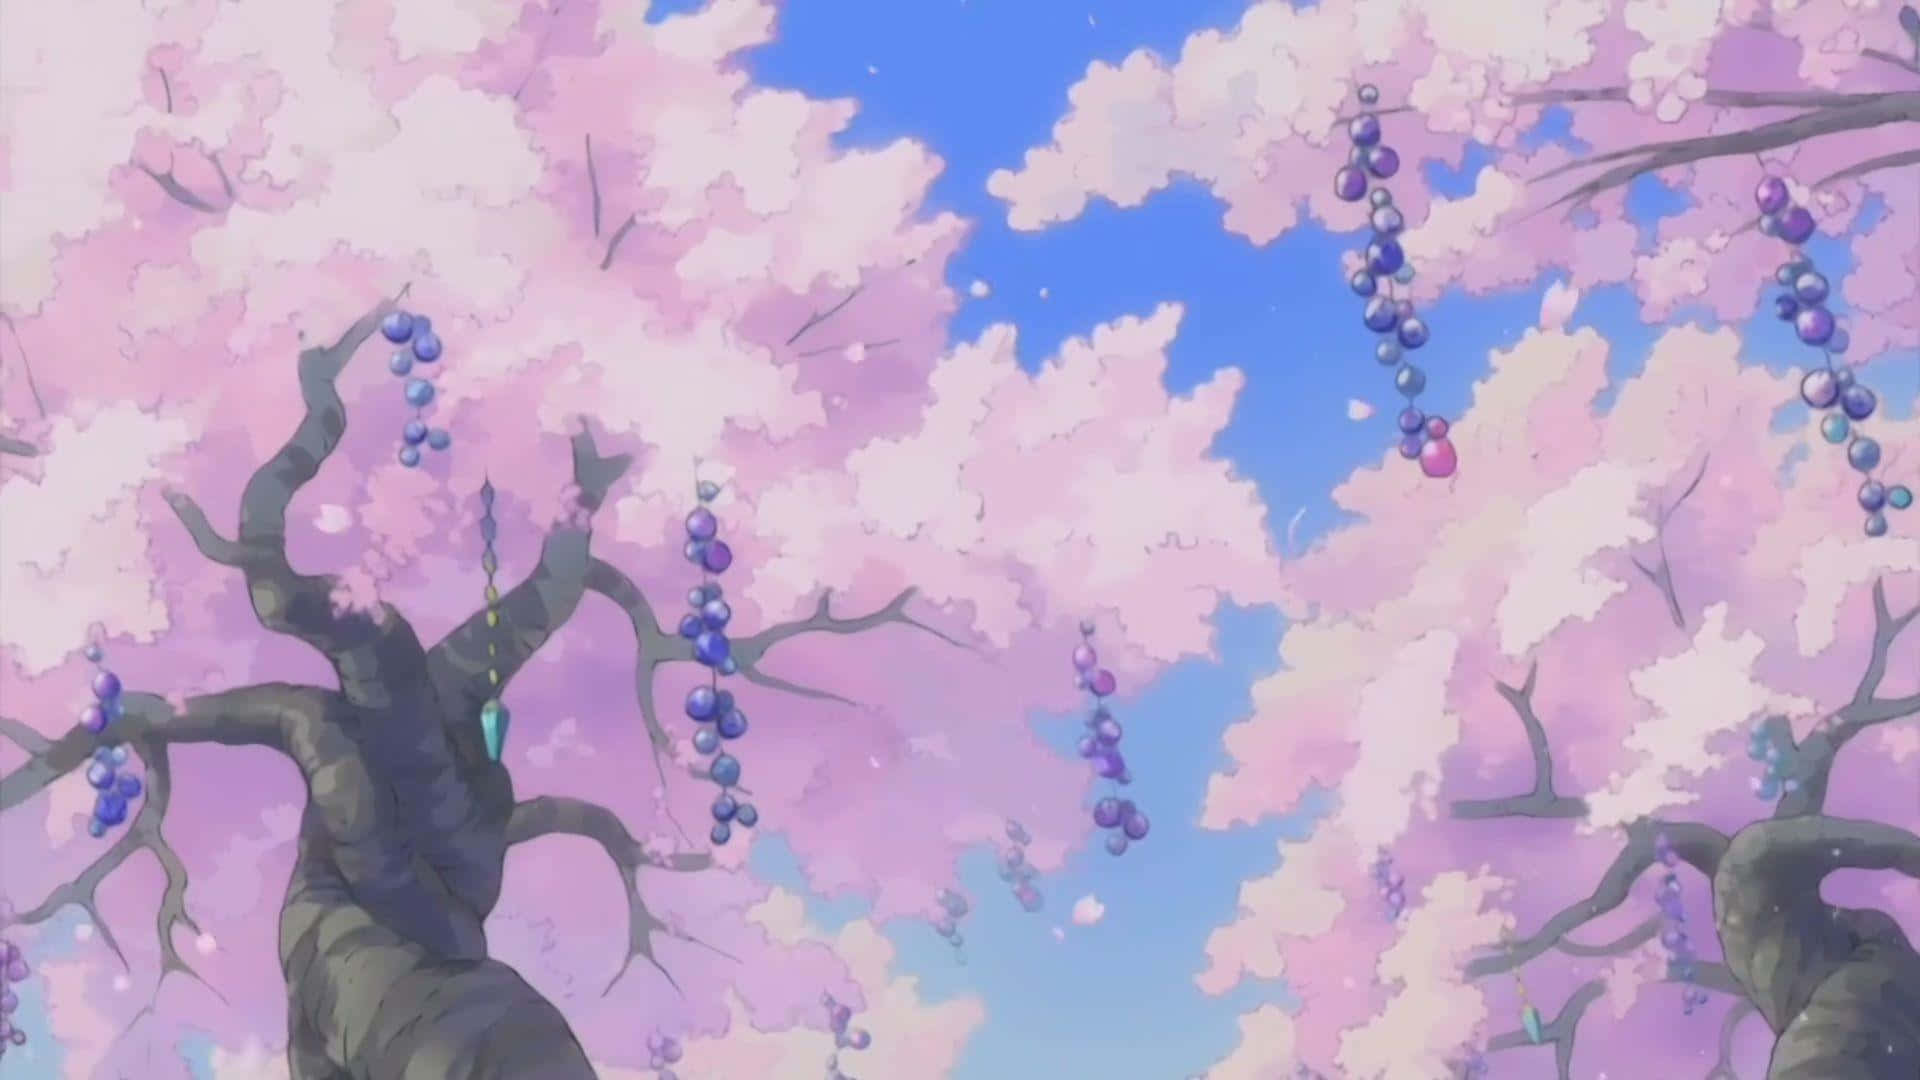 Download Enjoy the beauty of anime with this cute aesthetic anime desktop wallpaper! Wallpaper